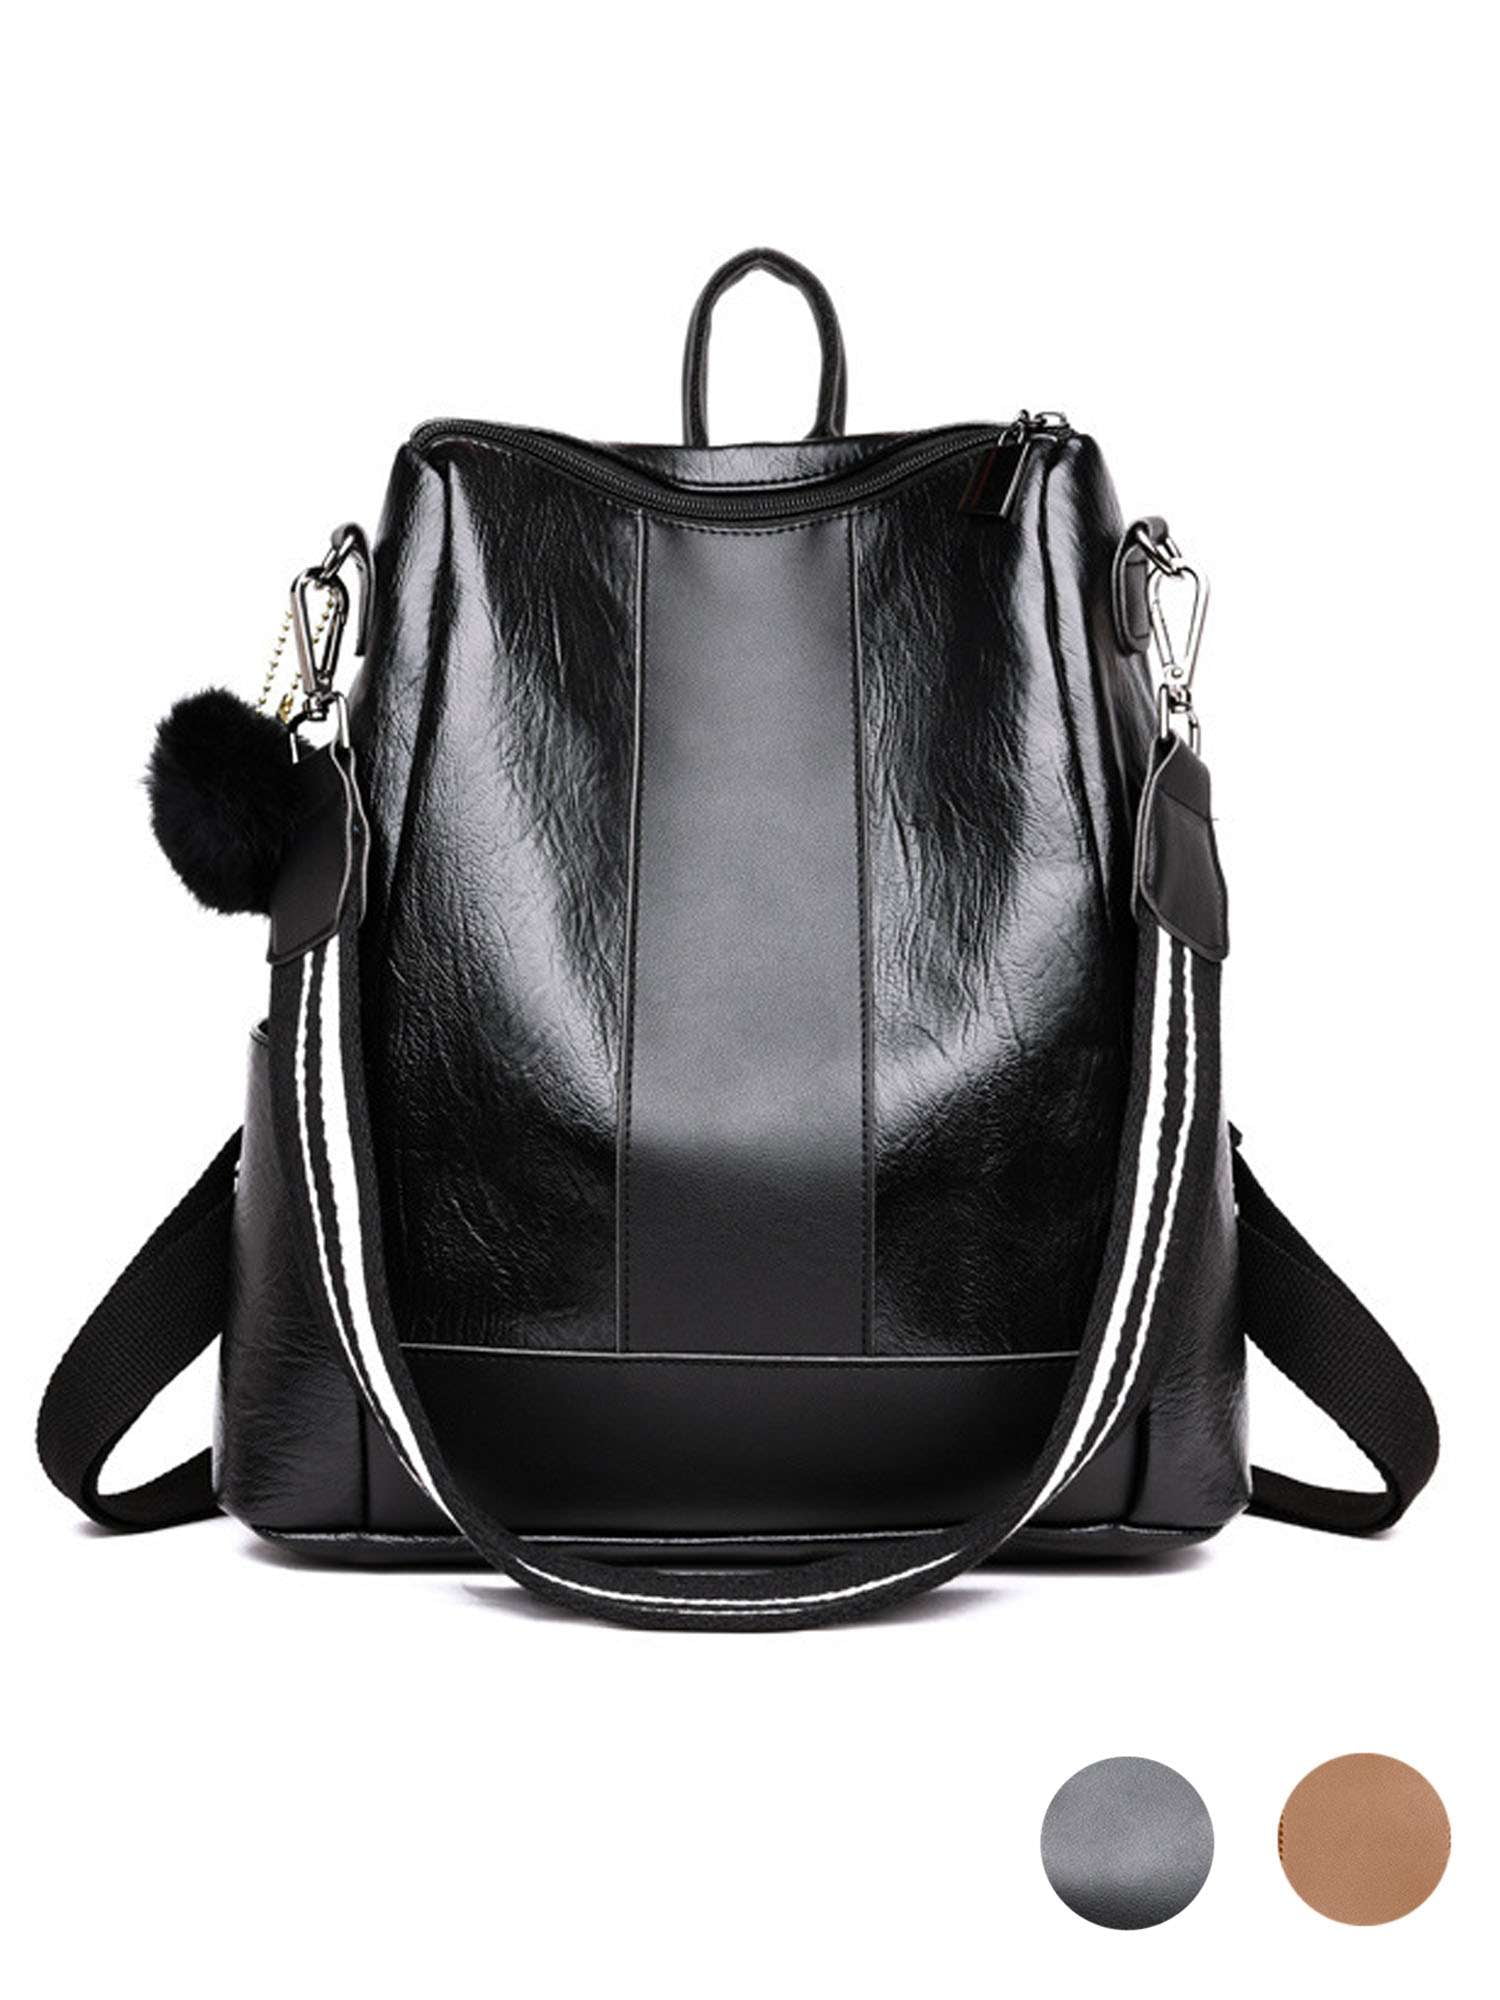 LAVA Leather Backpack Purses for Women Fashion Anti-theft Shoulder Bags ...